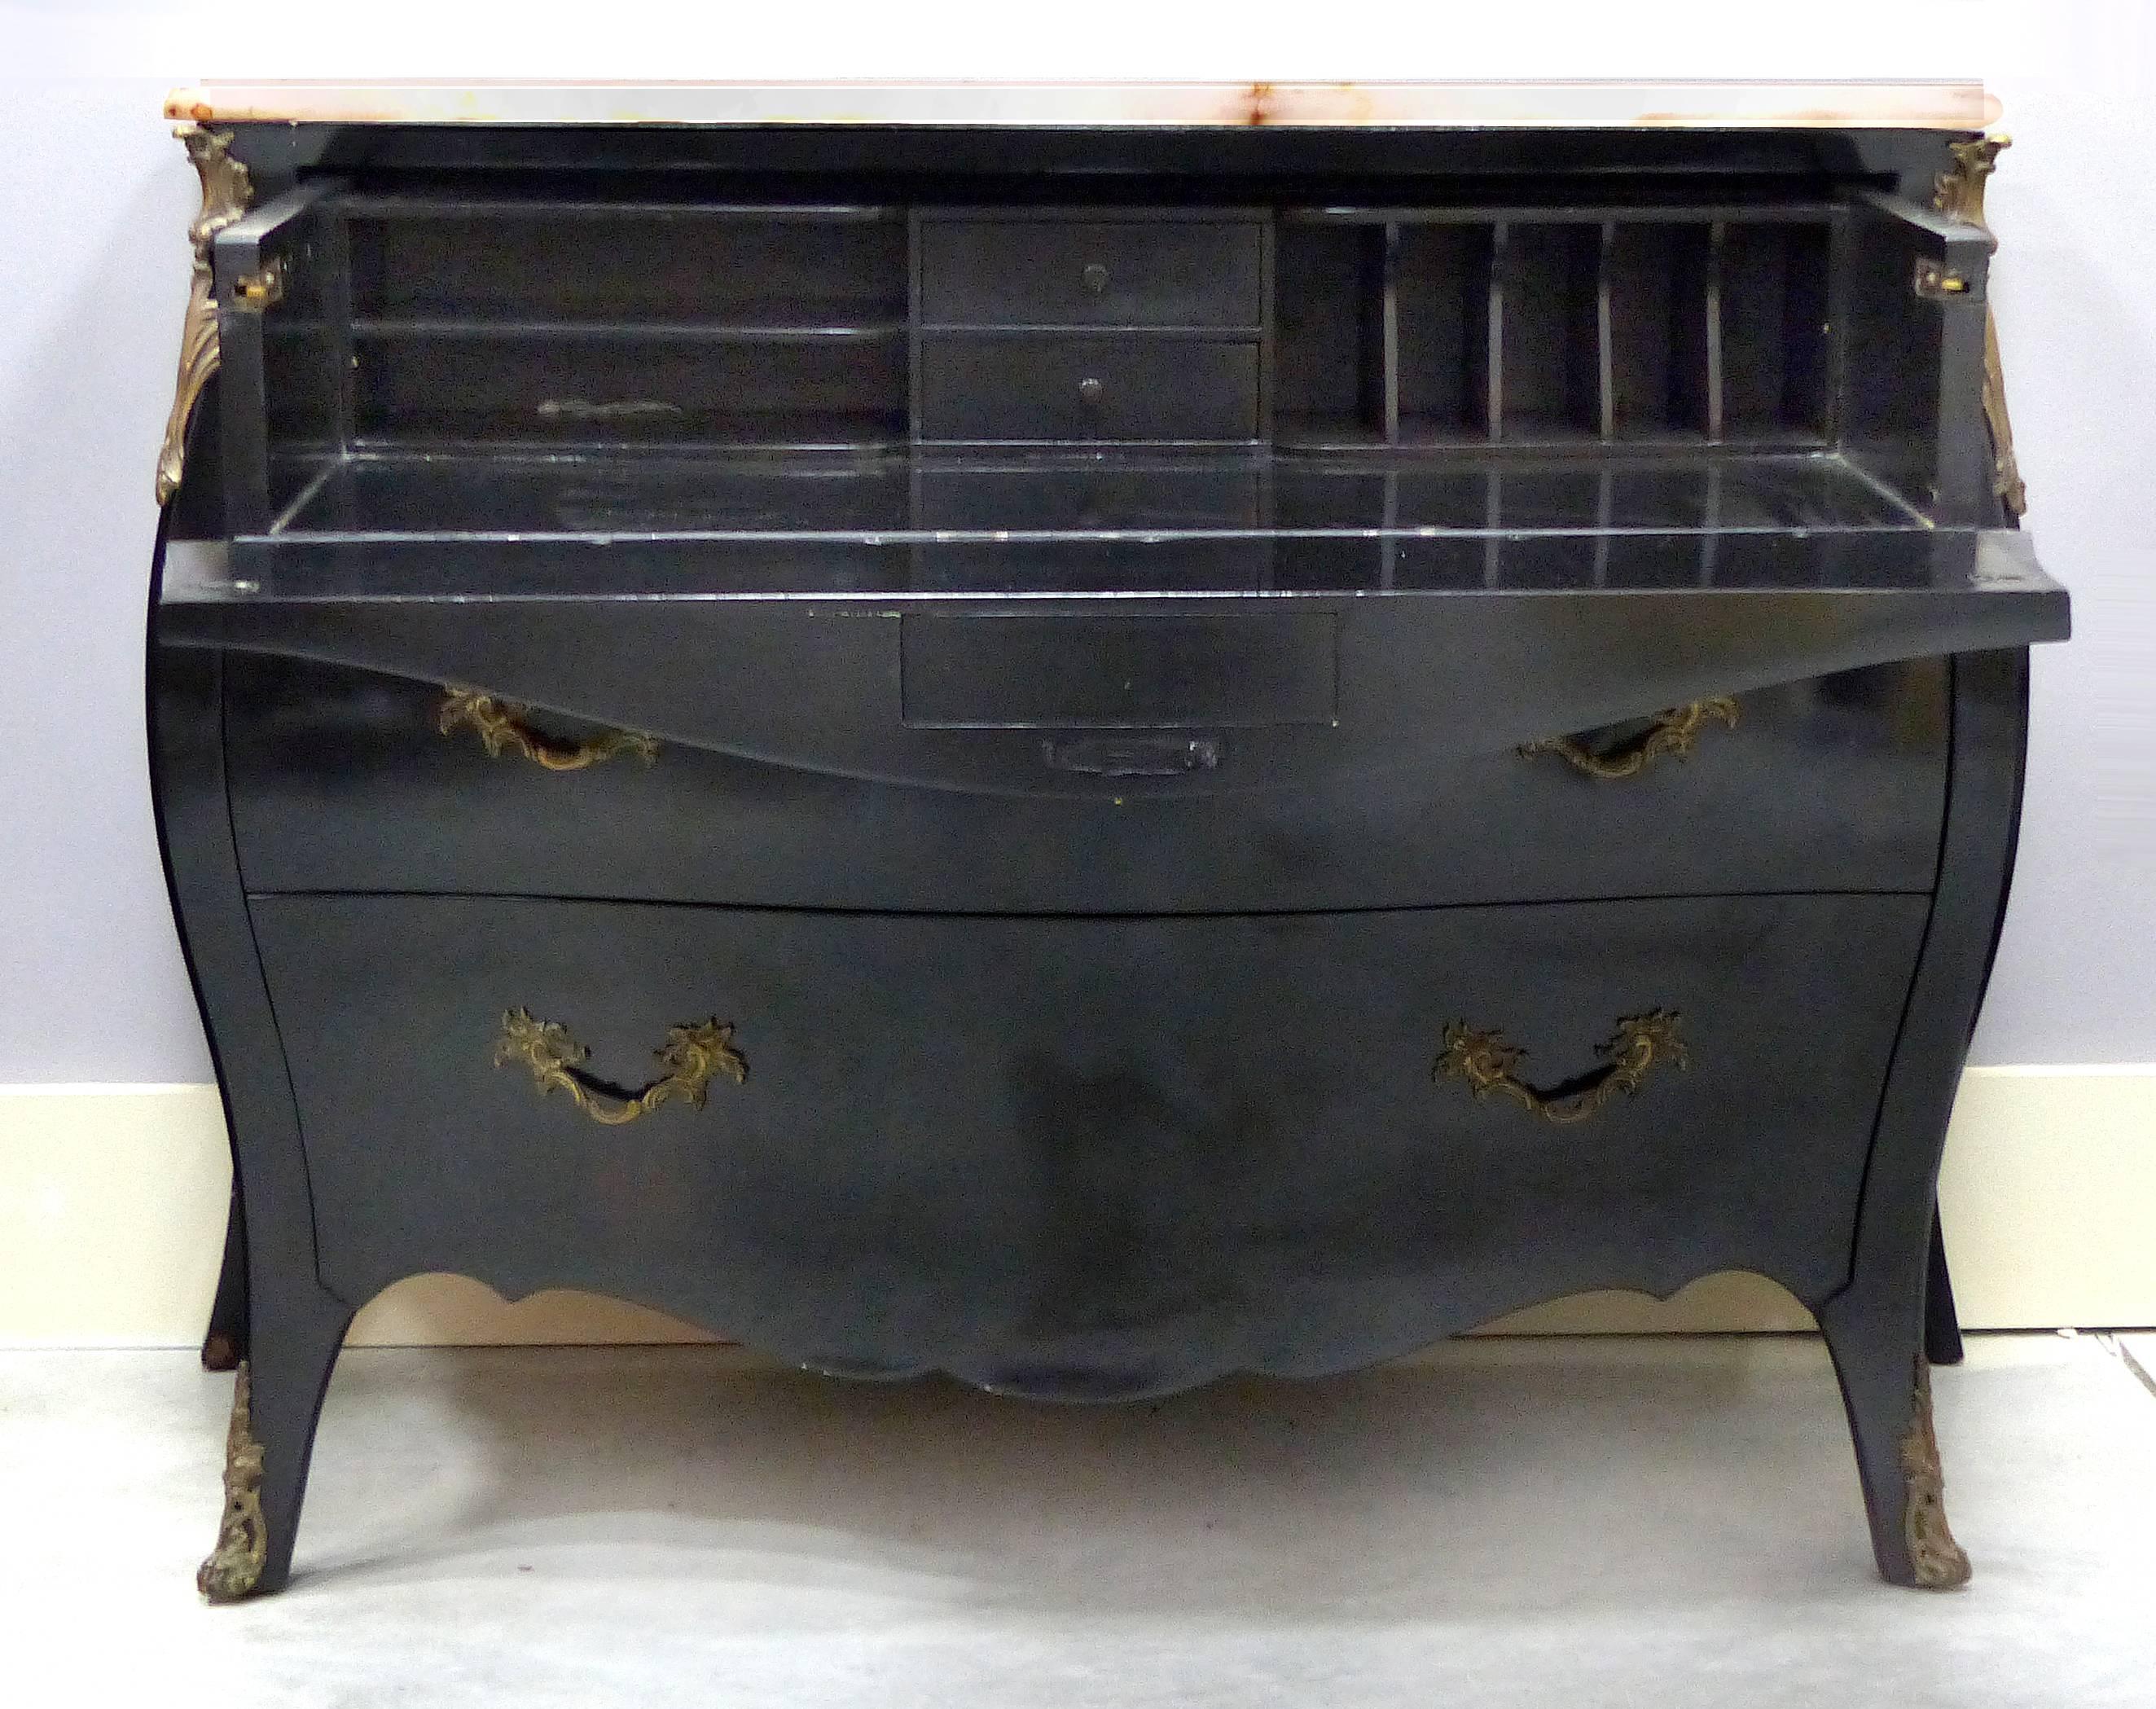 19th Century French Bombe Secretaire with Bronze Mounts and Onyx Top

Offered for sale is a late 19th century ebonized bombe secretaire with an onyx top. The top drawer drops down to create a writing surface and expose cubby holes with drawers for